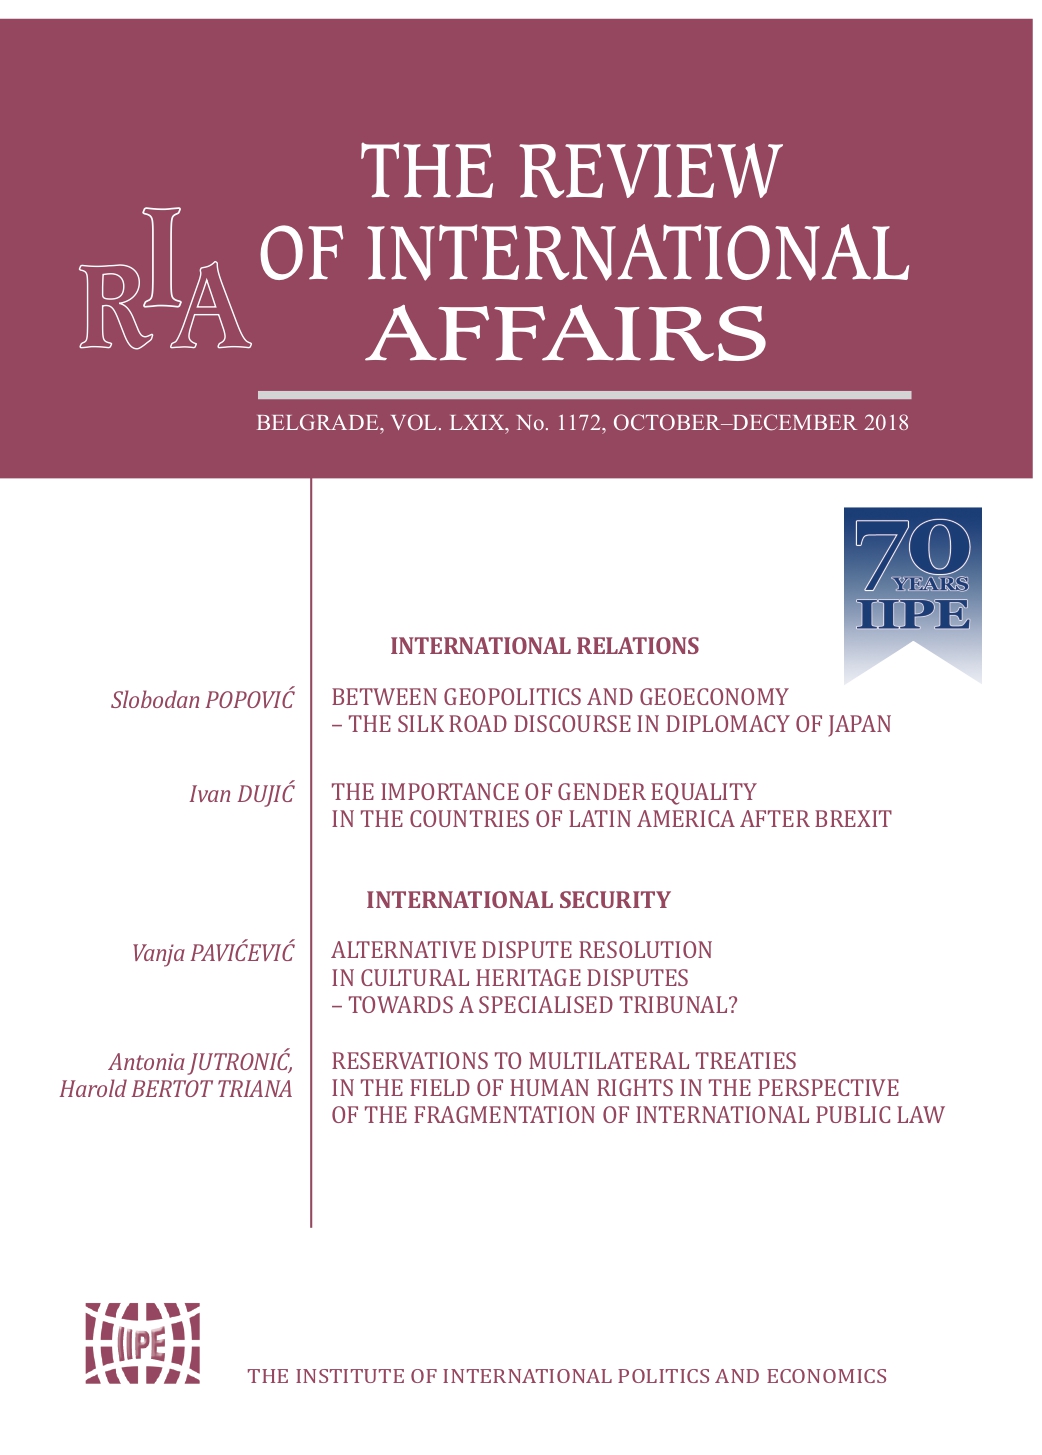 Reservations to multilateral treaties in the field of human rights in the perspective of the fragmentation of international public law Cover Image